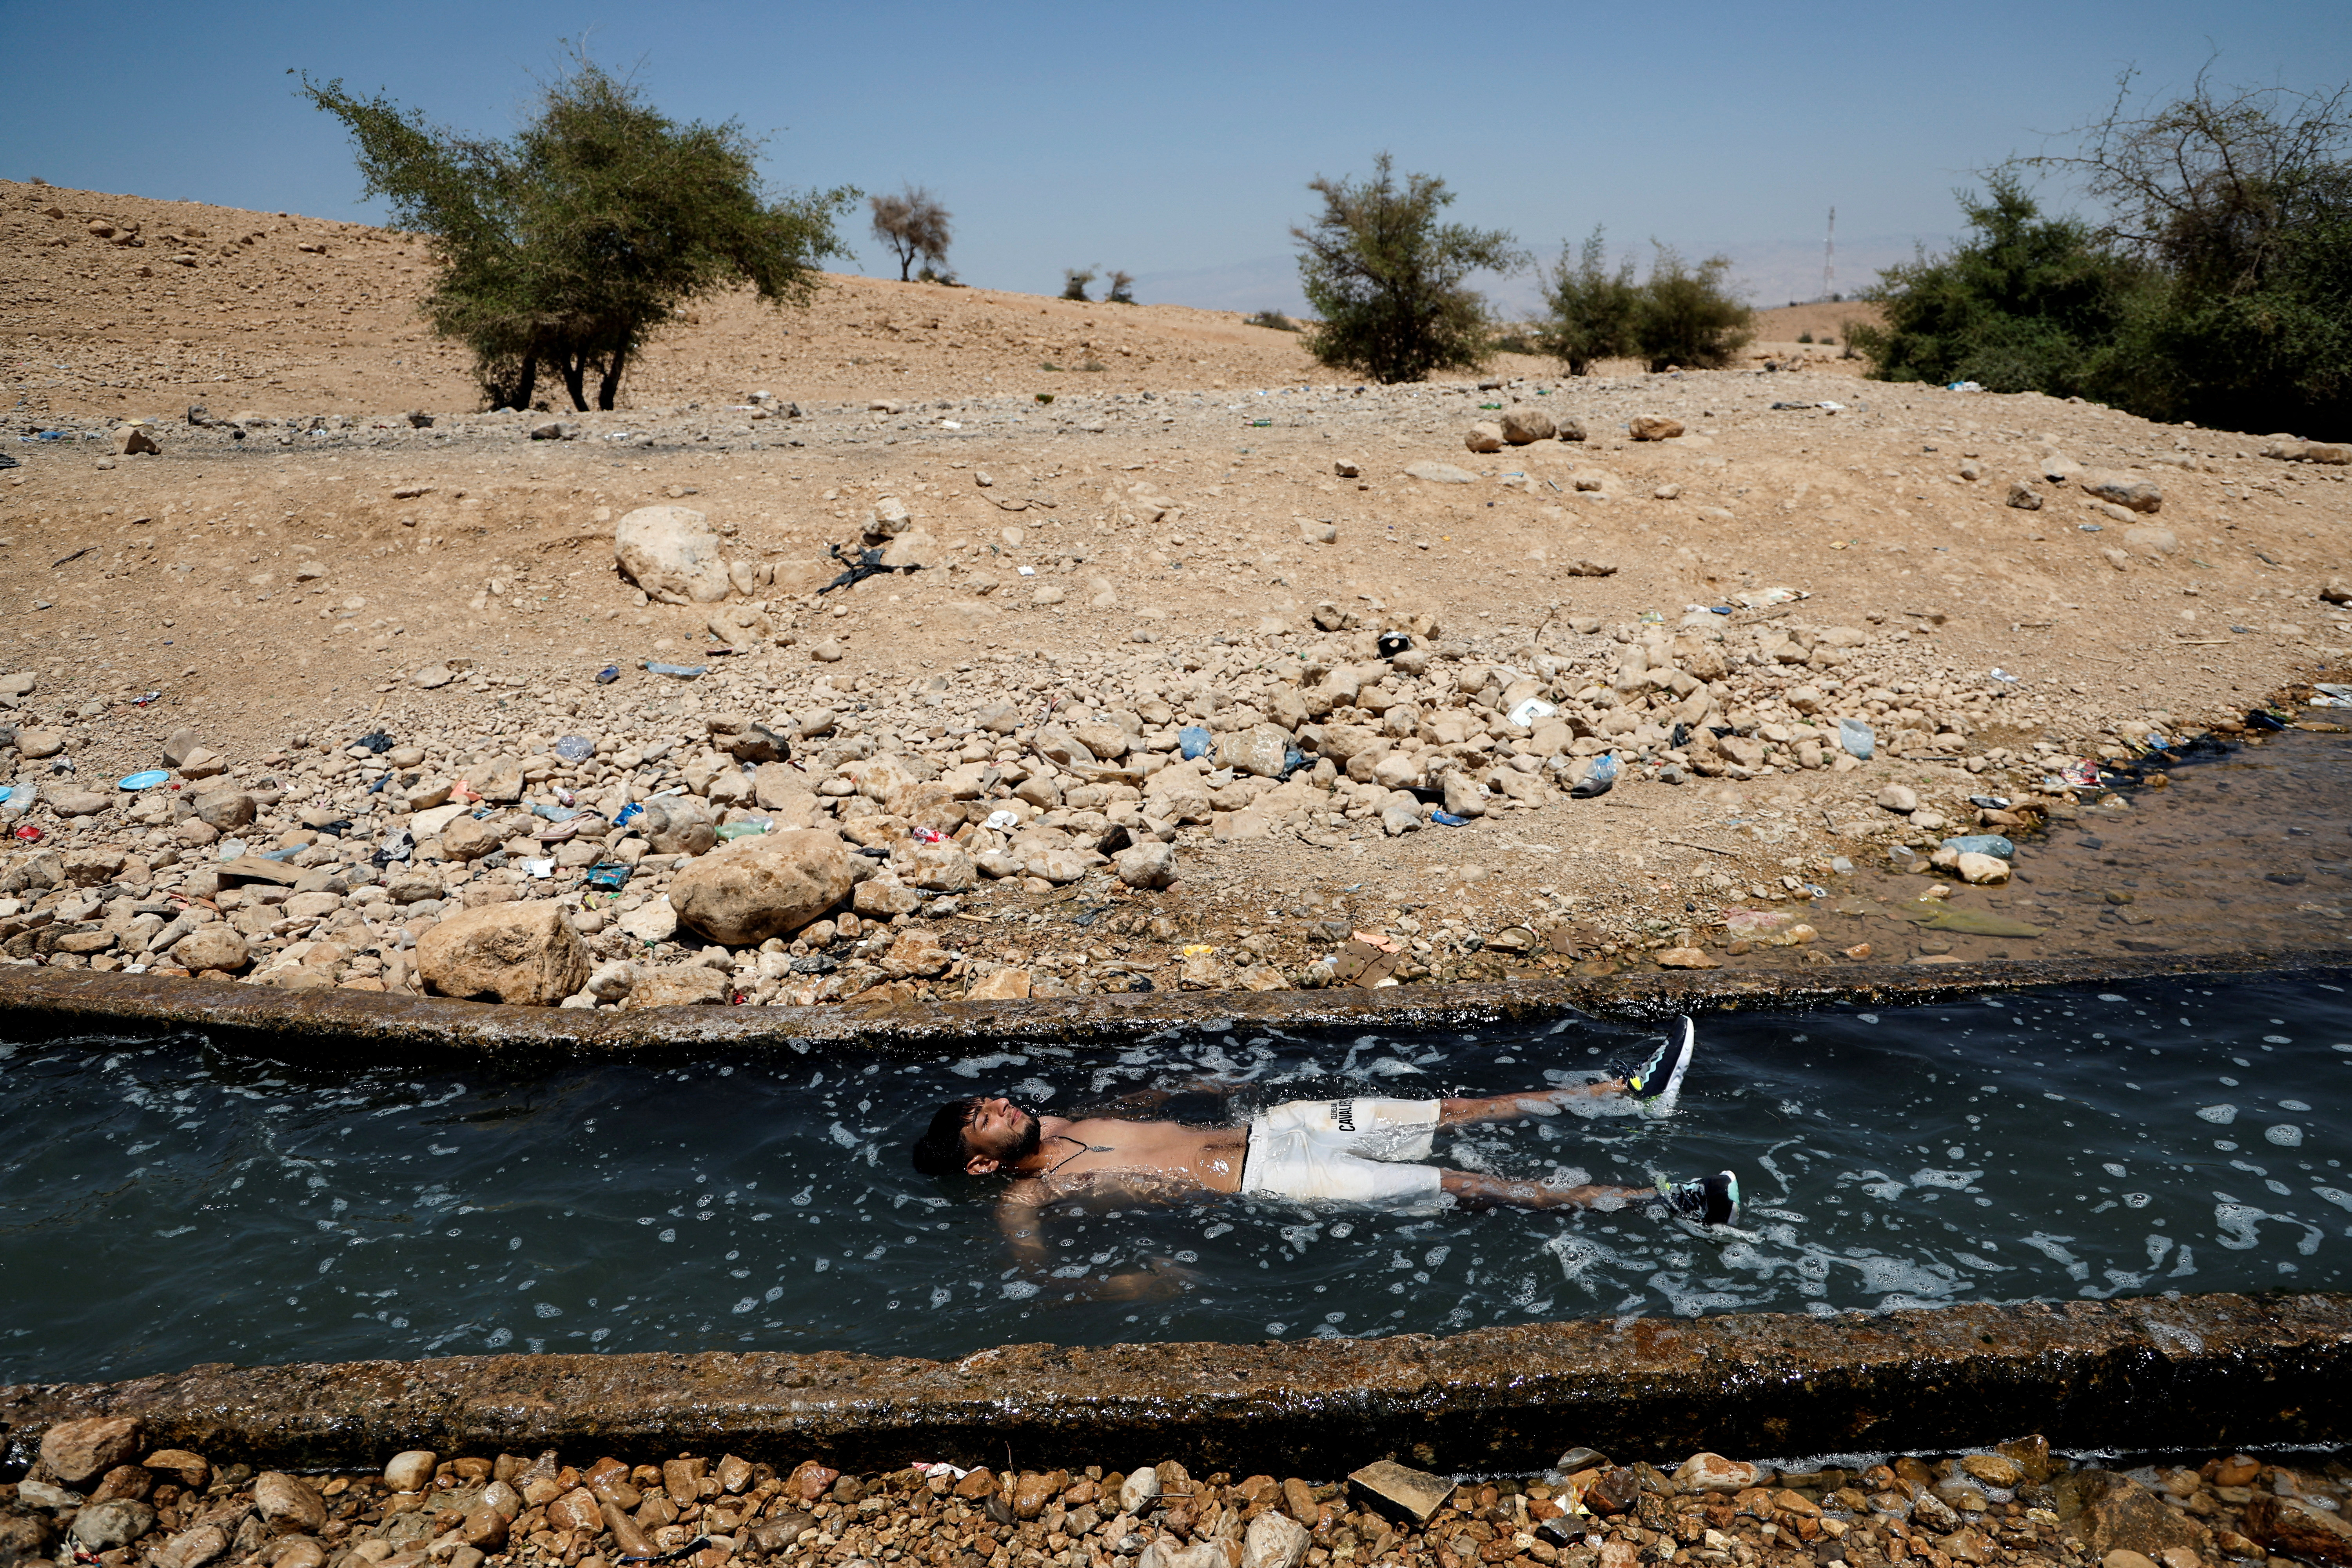 A Palestinian man cools off during a heat wave, in al-Oja springs near Jericho in the Israeli-occupied West Bank